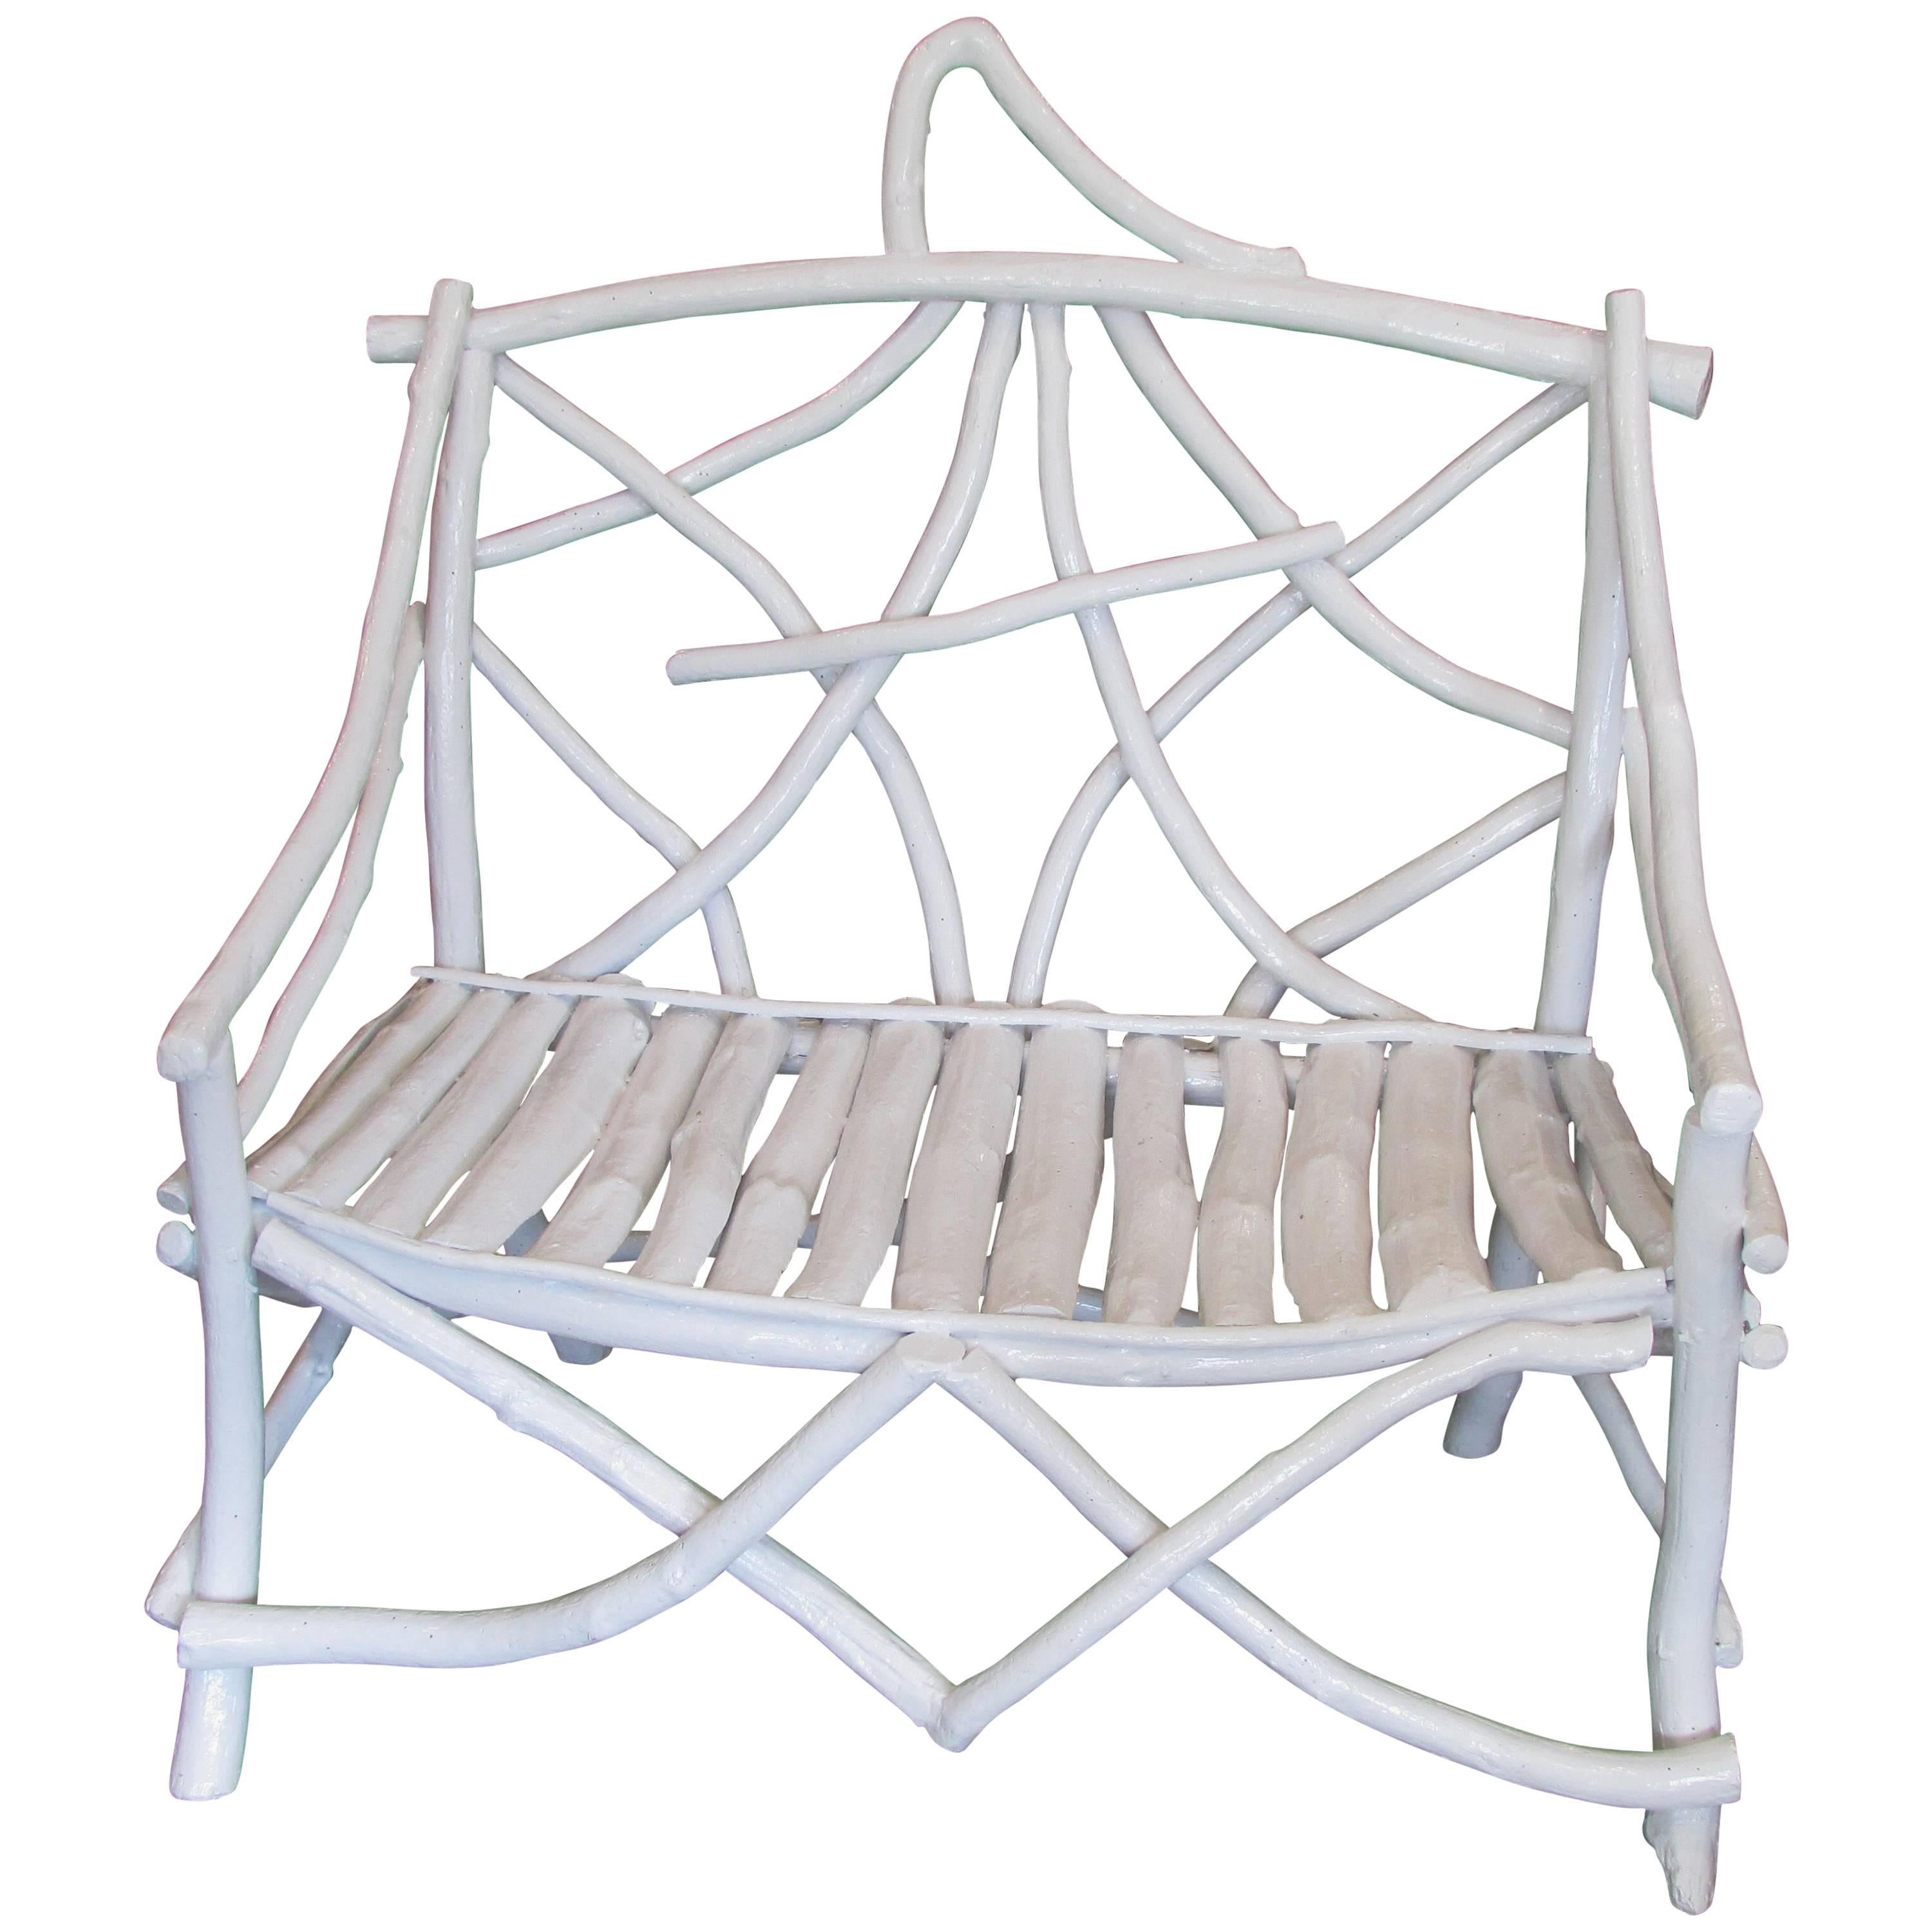 Rustic White Twig Bench